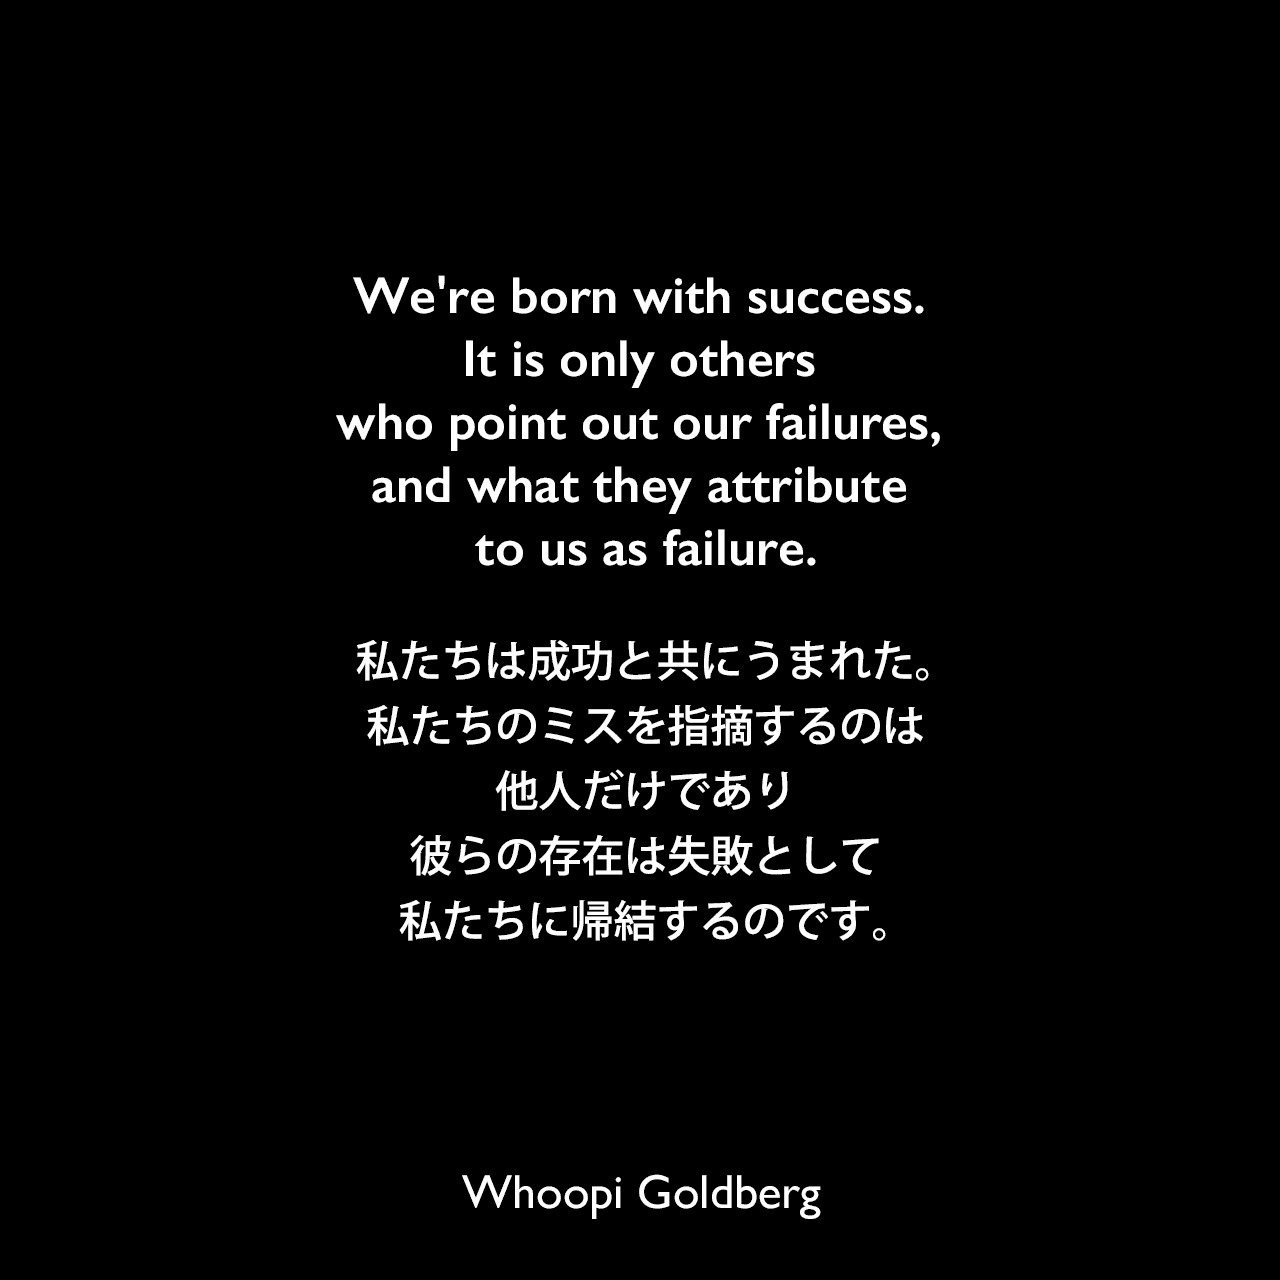 We're born with success. It is only others who point out our failures, and what they attribute to us as failure.私たちは成功と共にうまれた。私たちのミスを指摘するのは他人だけであり、彼らの存在は失敗として私たちに帰結するのです。Whoopi Goldberg